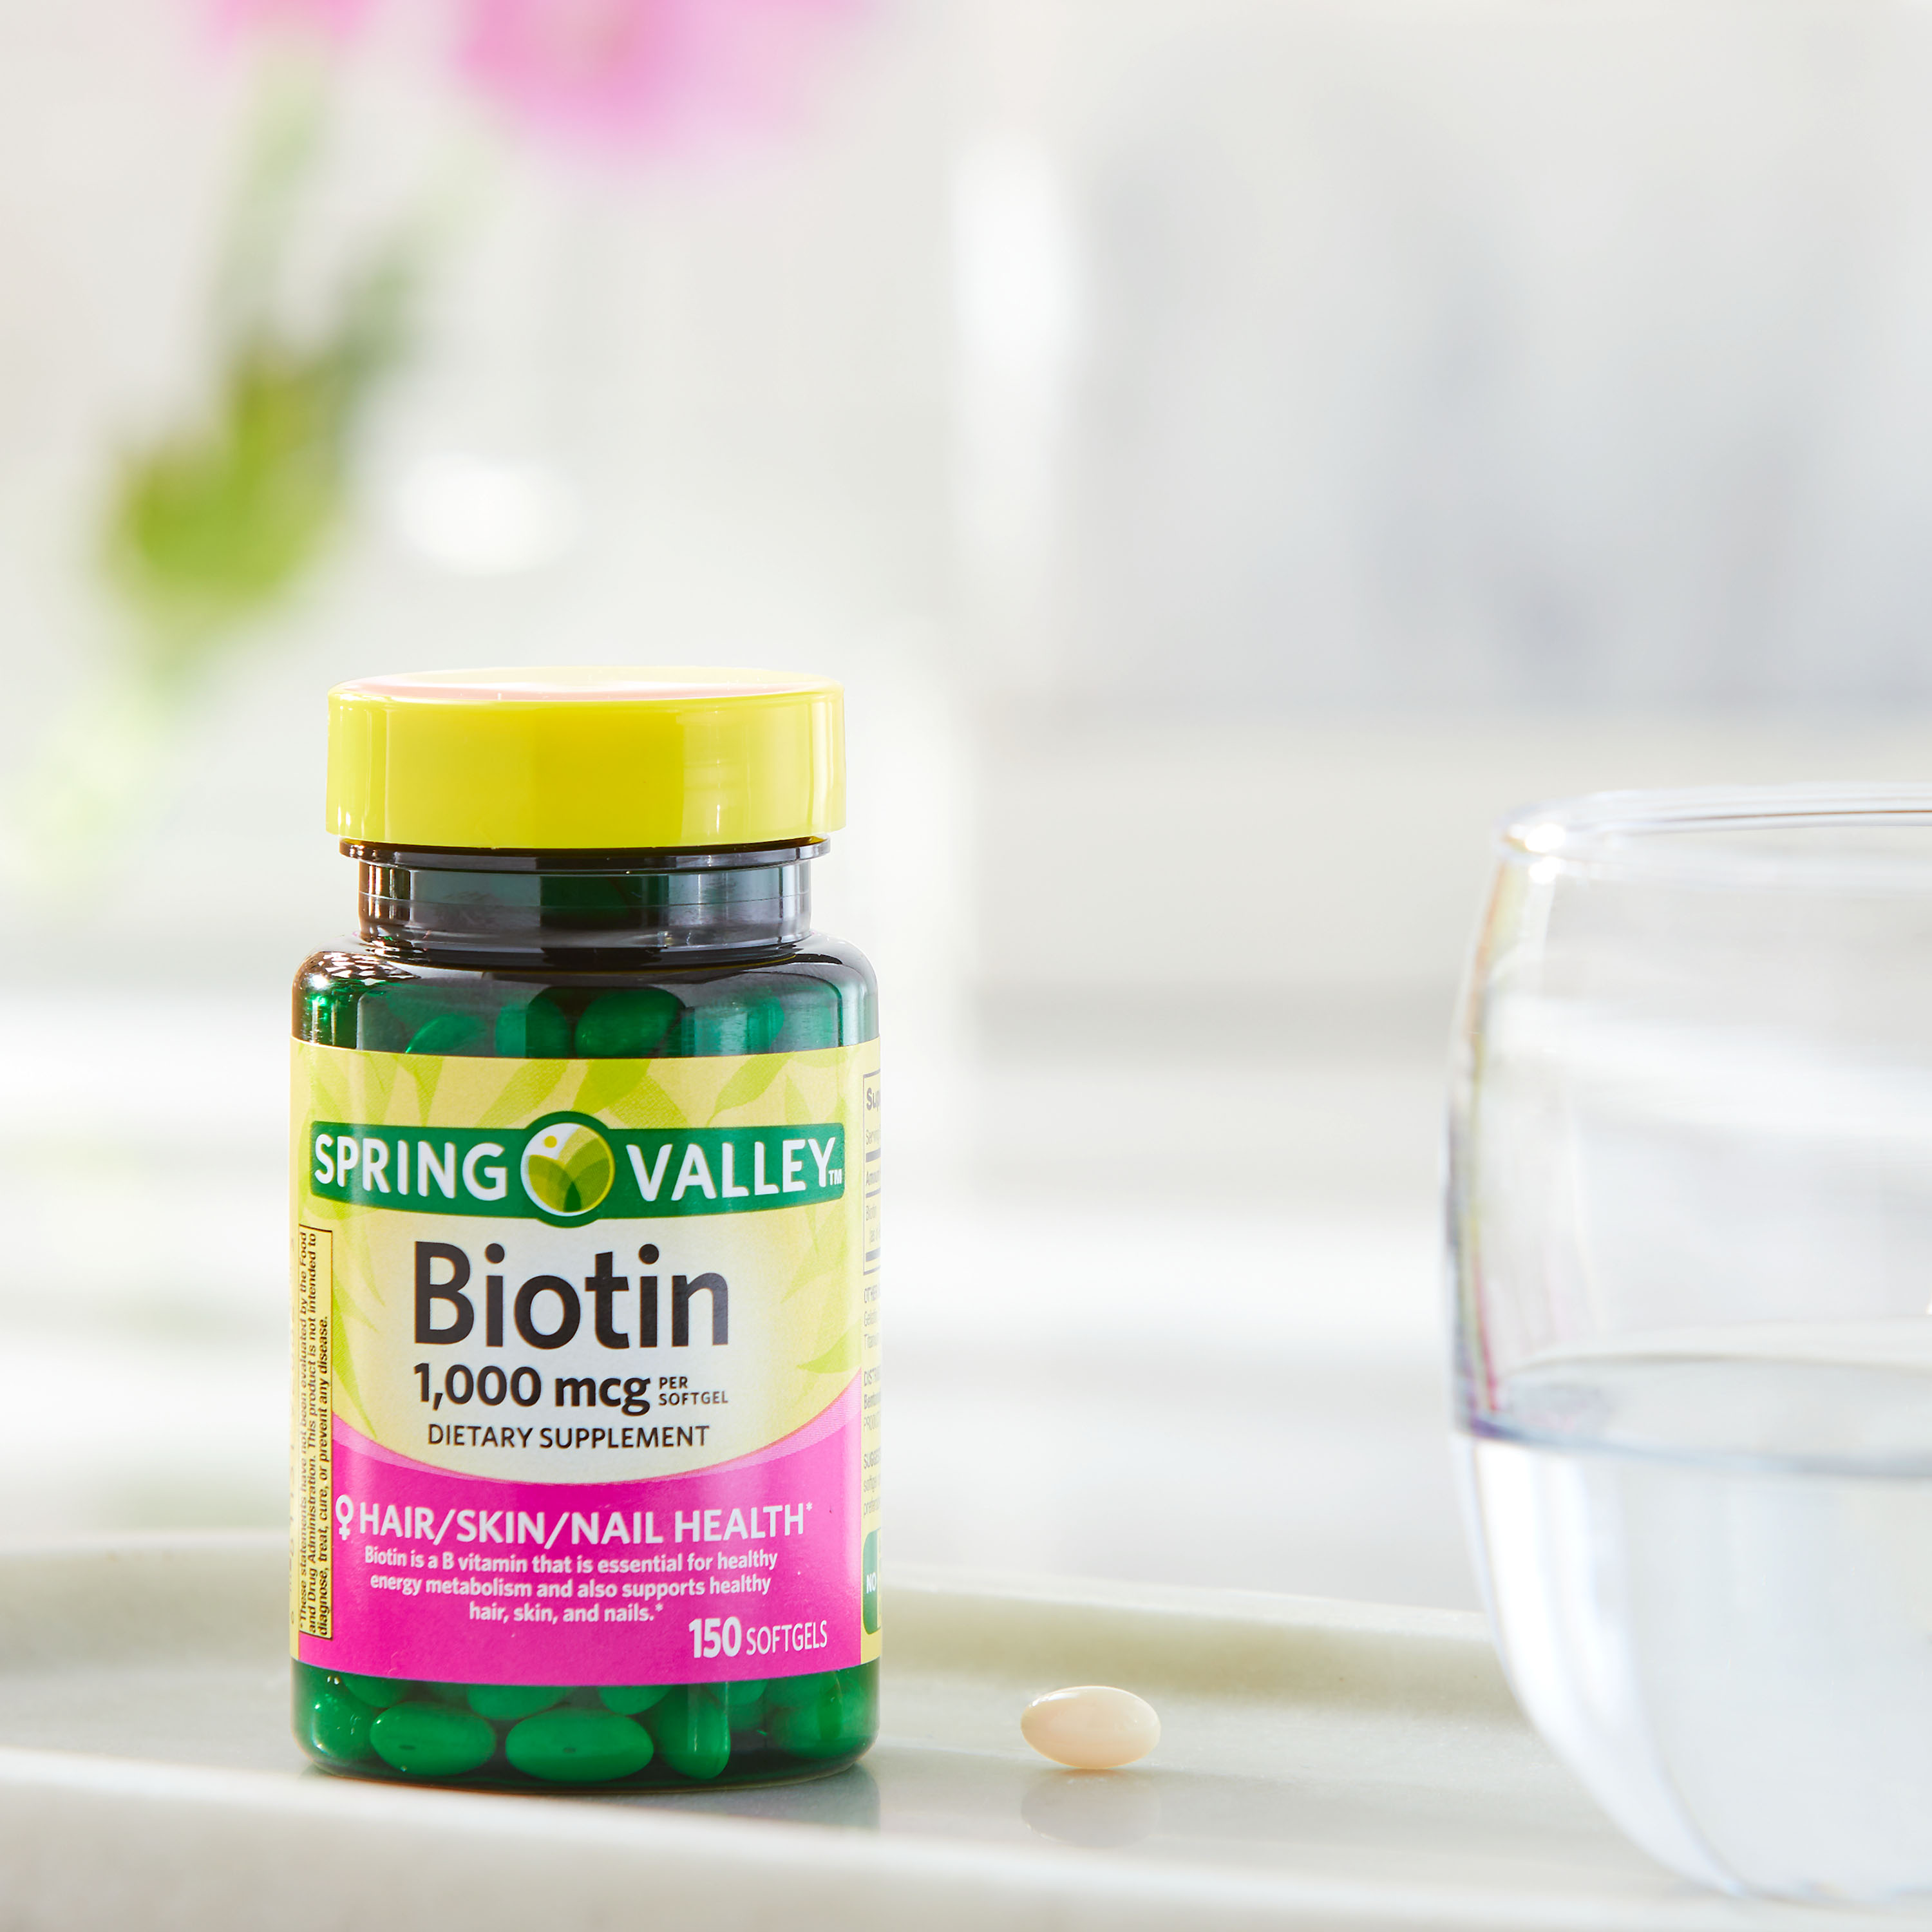 Spring Valley Biotin Softgels, 1000mcg, 150 Count - image 4 of 10